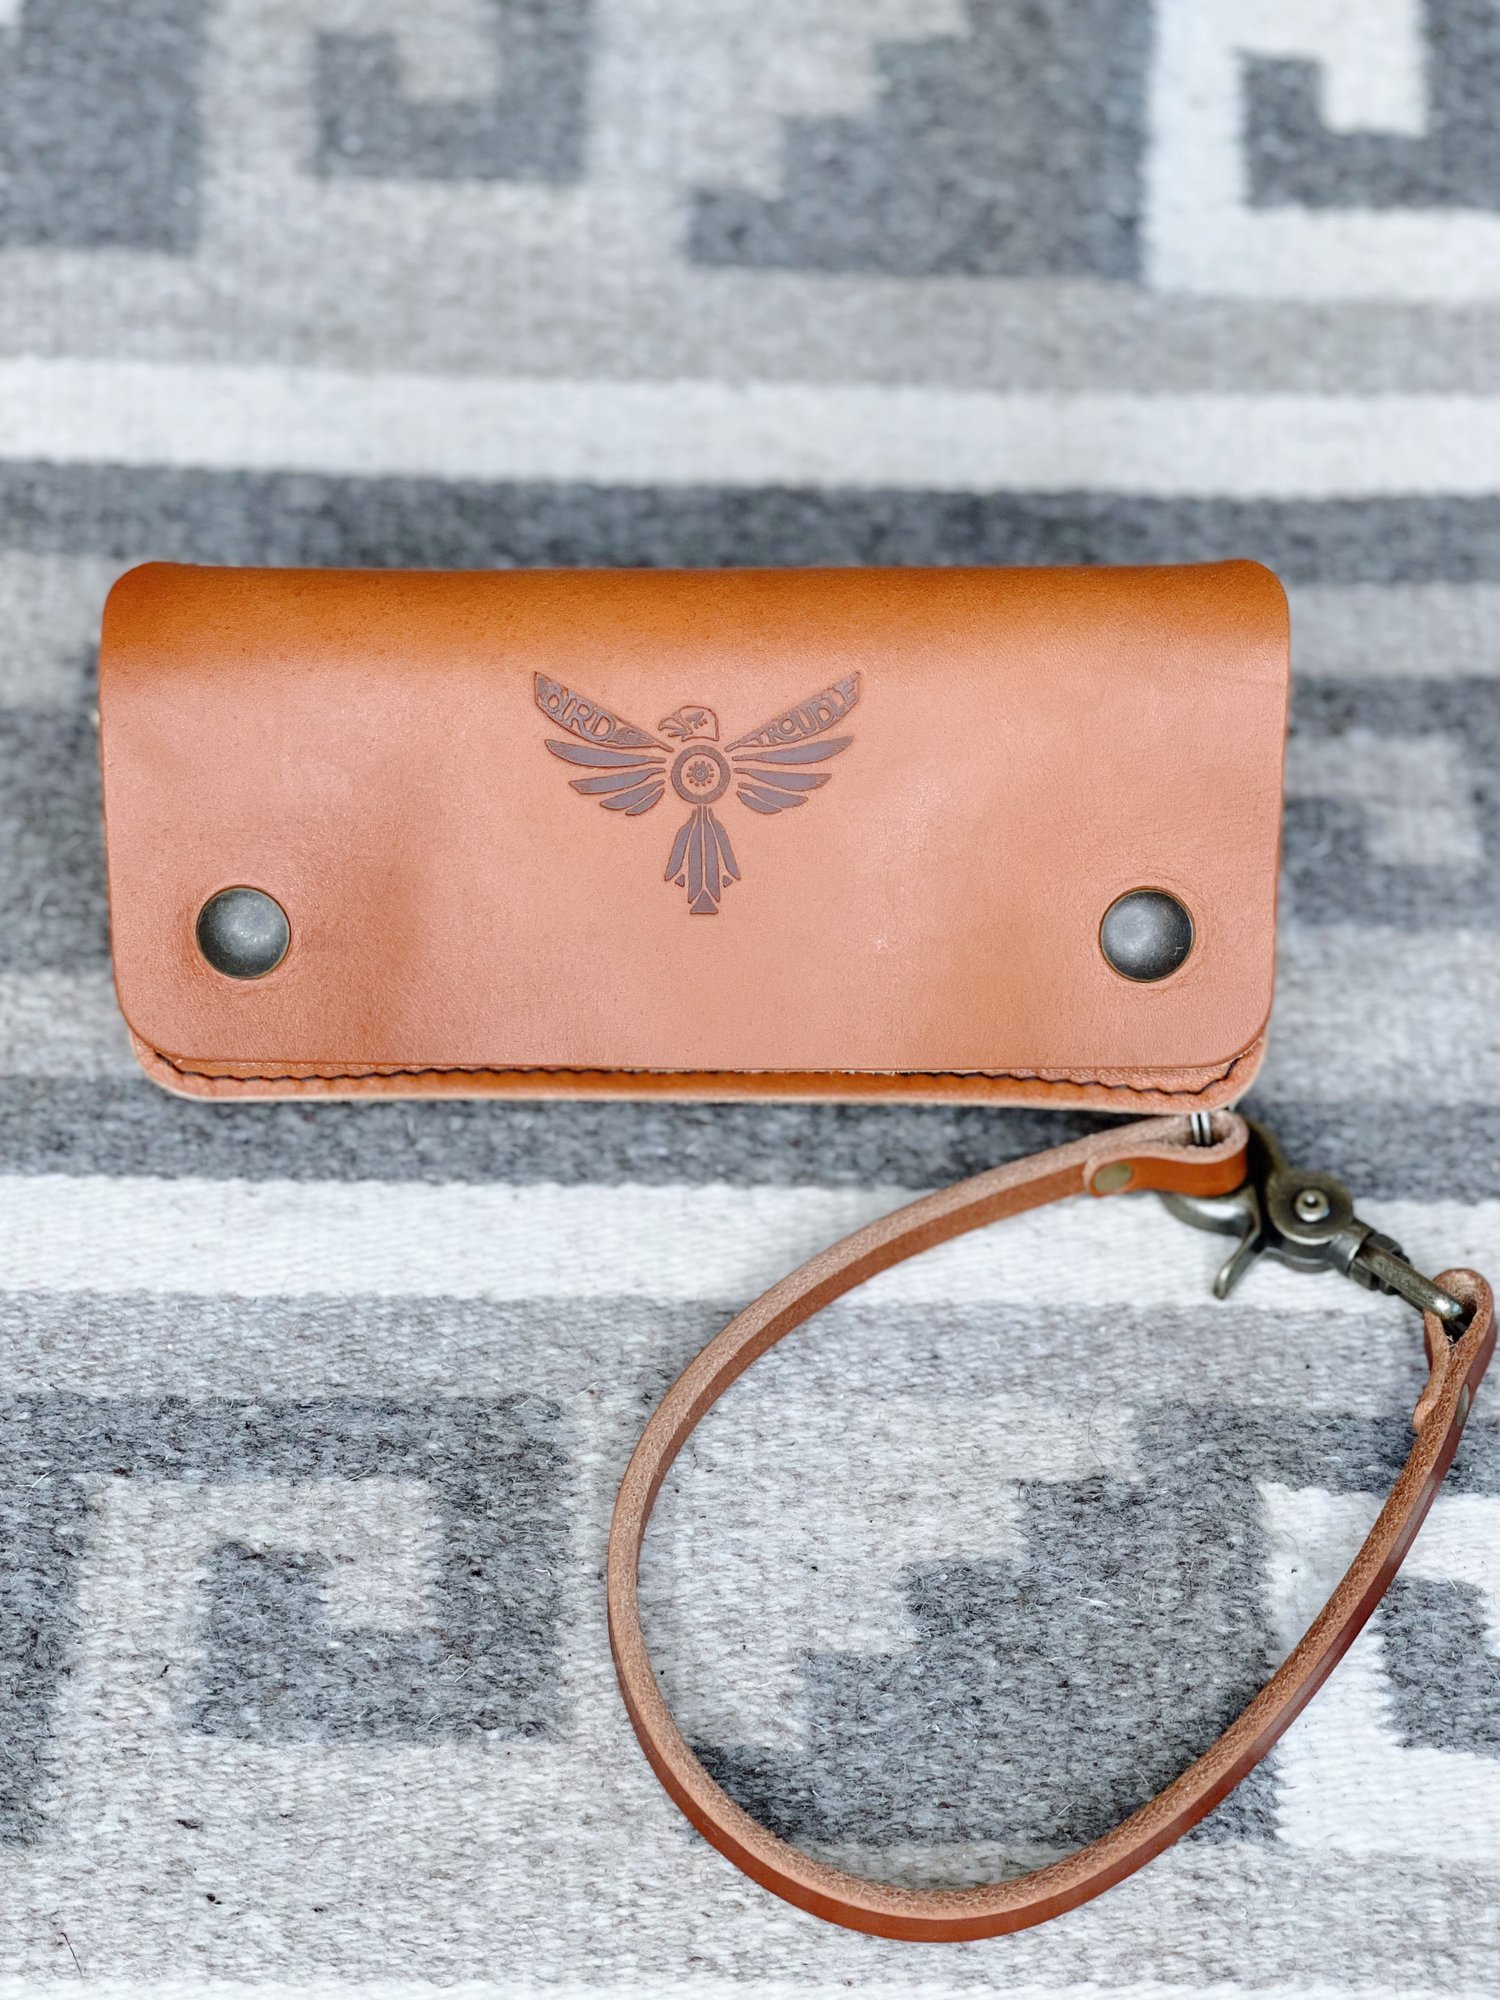 Trucker Wallet in English Tan Bridle Leather - Handcrafted